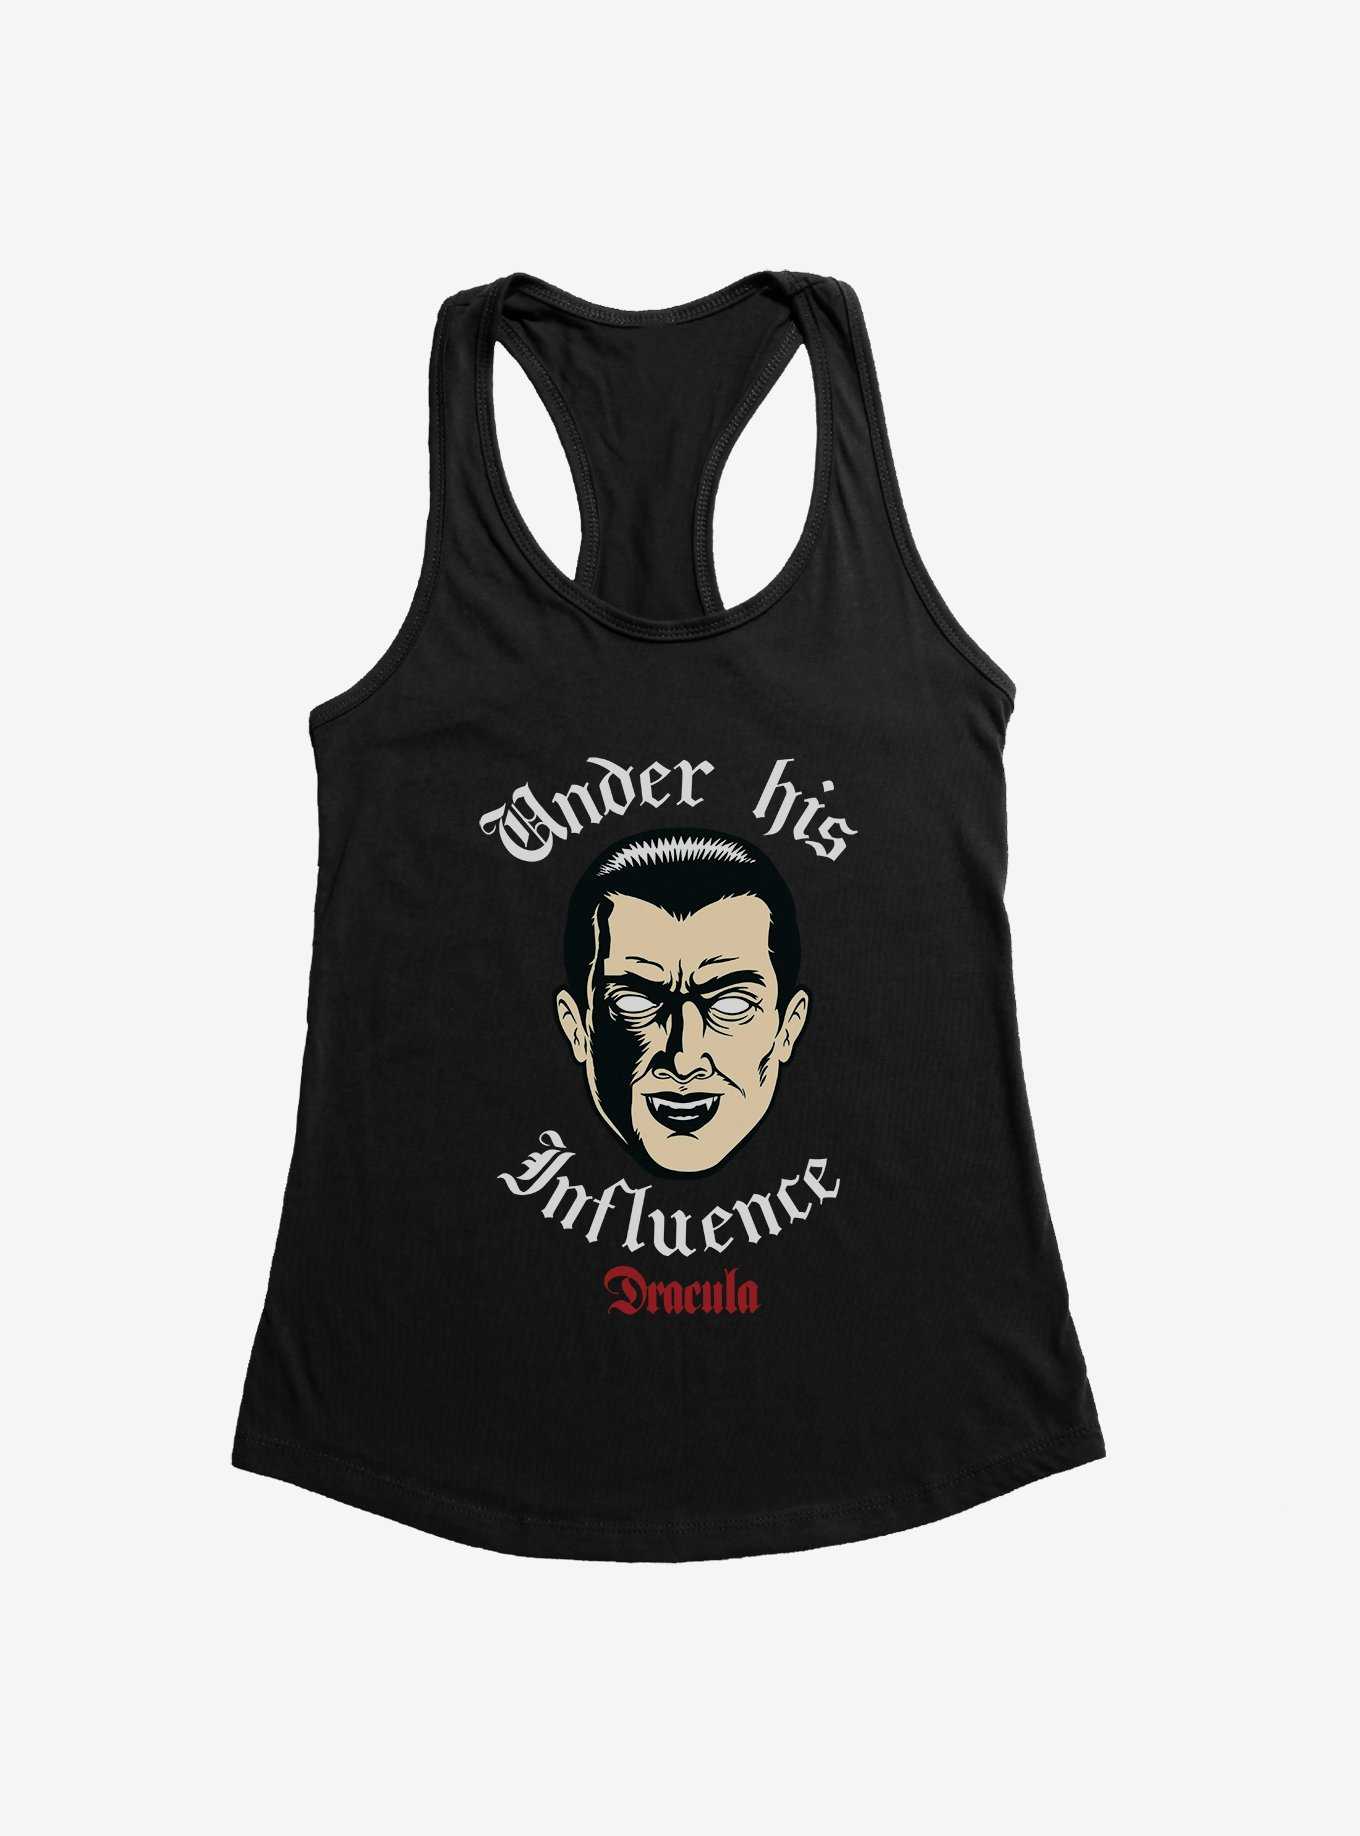 Universal Monsters Dracula Under His Influence Girls Tank, , hi-res